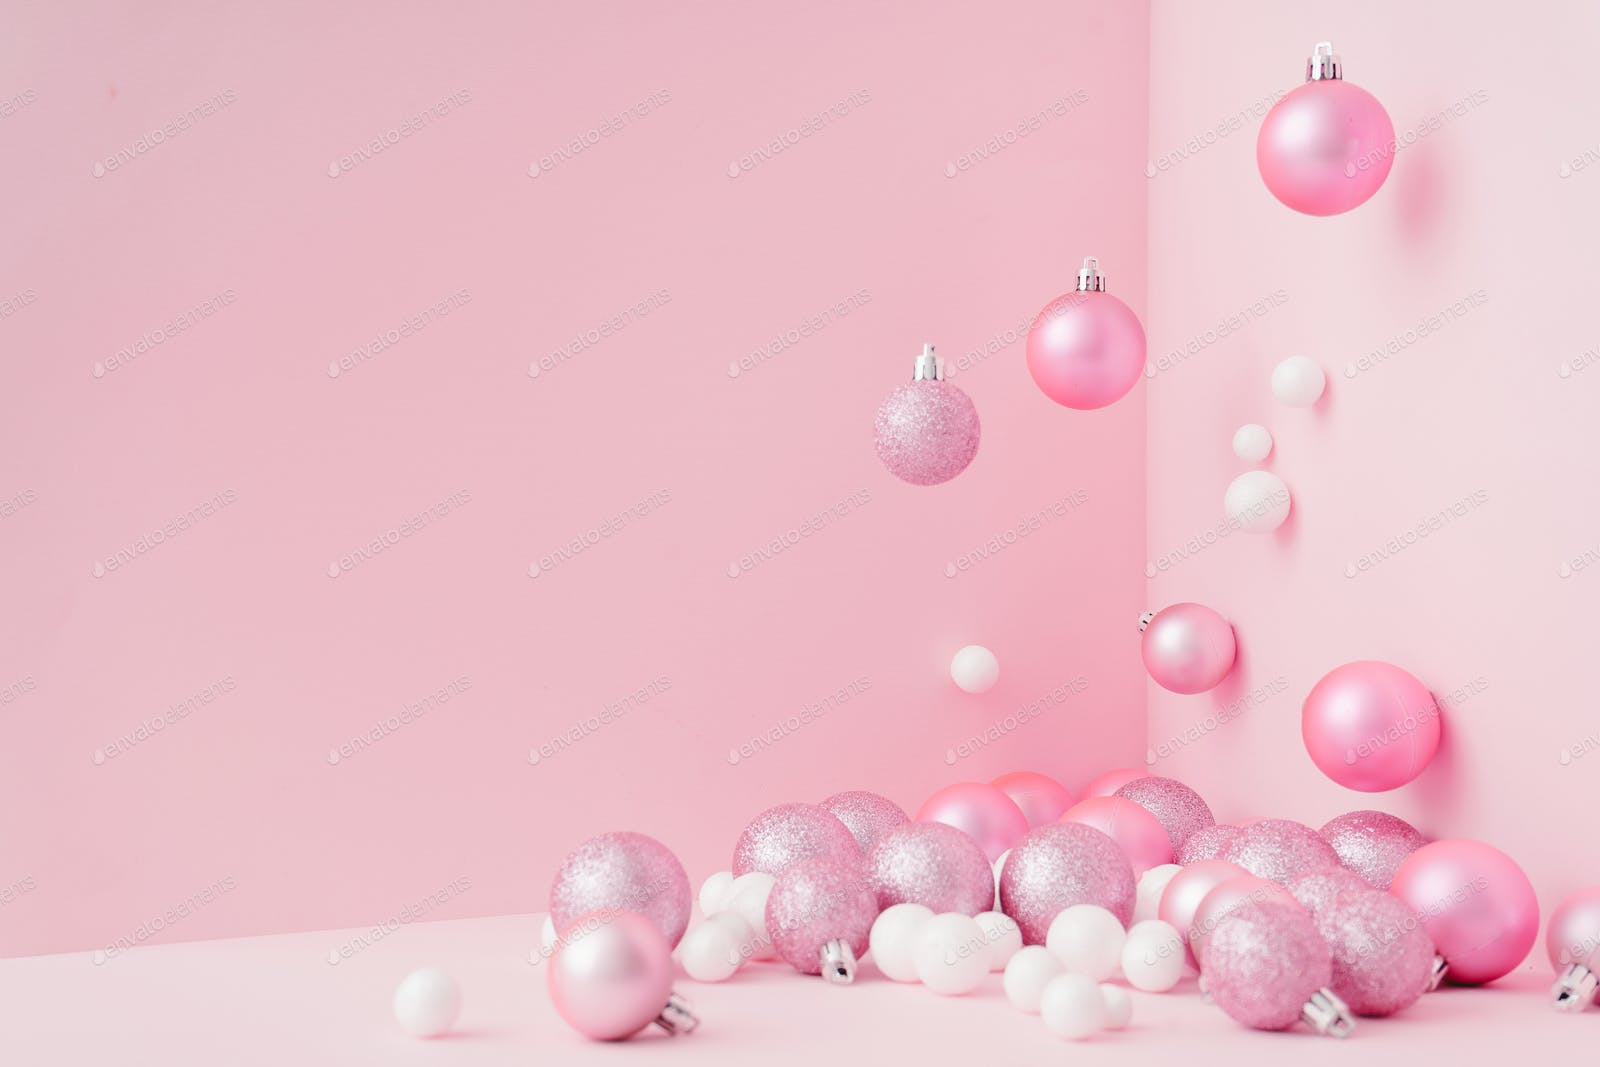 Creative Christmas design pink pastel color background. New Year concept. photo by zamurovic on Envato Elements